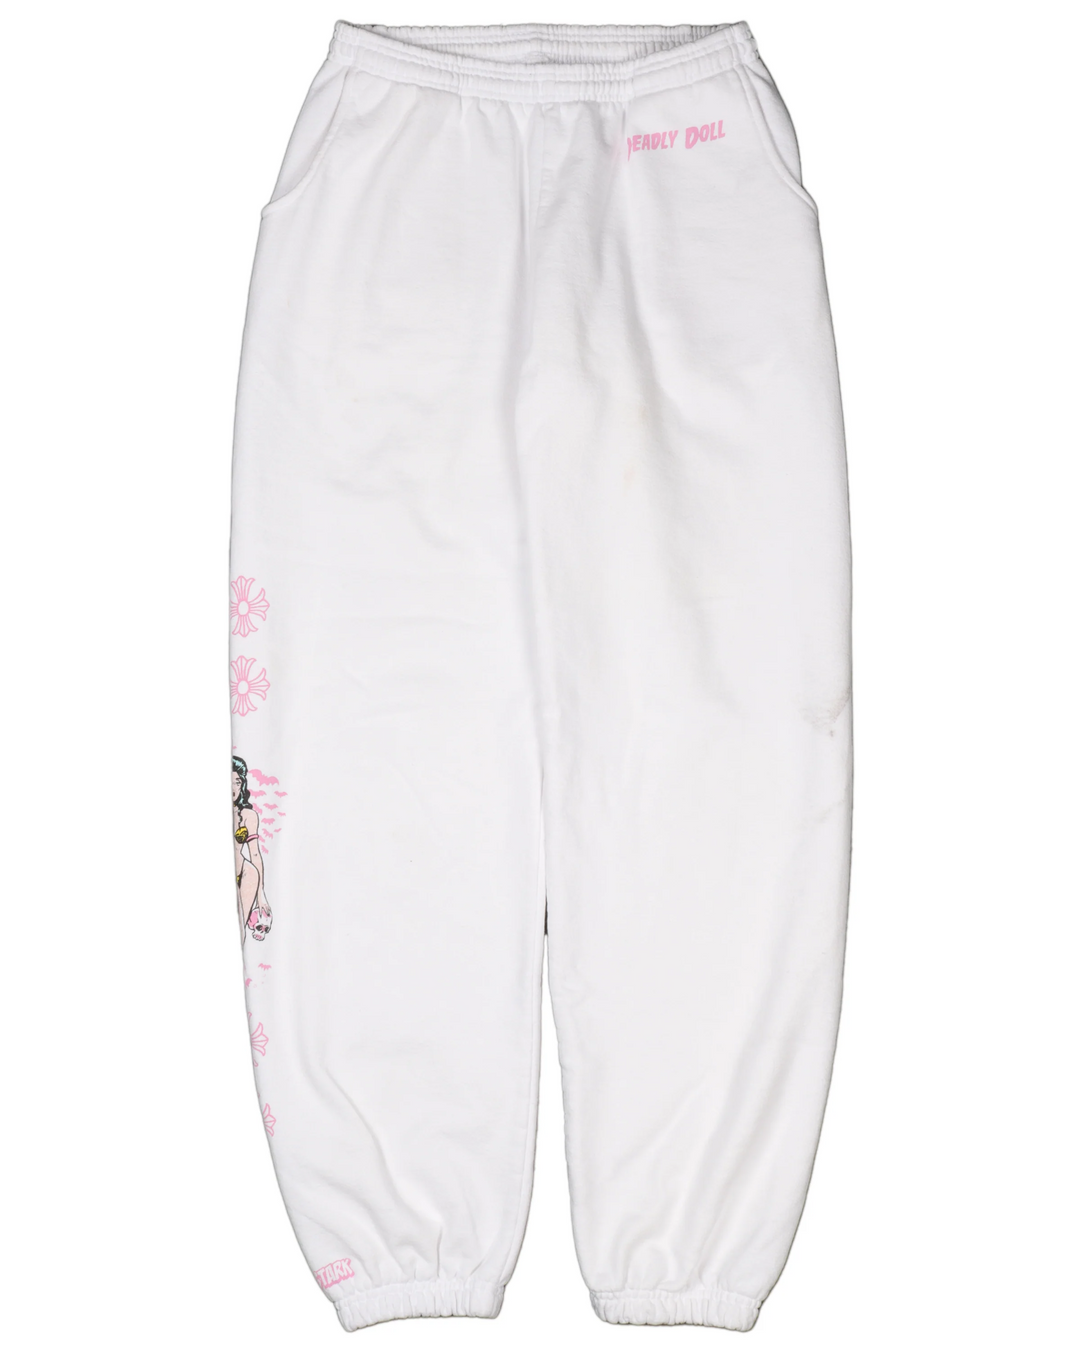 Chrome Hearts Deadly Doll 'Pink' Sweatpants